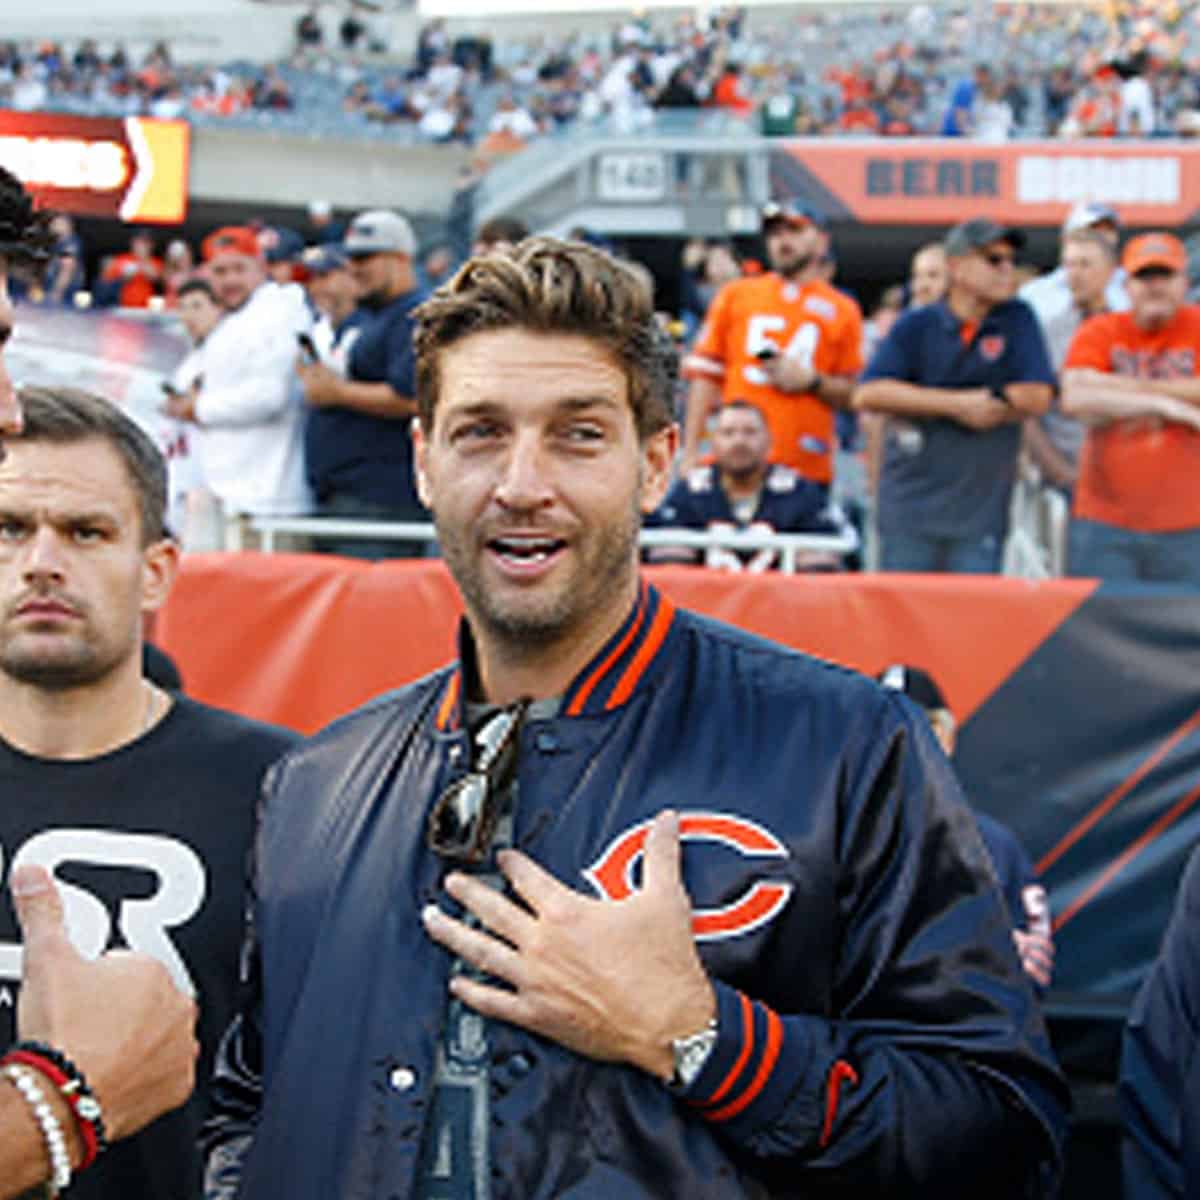 Jay Cutler stands on the field with former teammate Zach Miller, left, prior to the game between the Chicago Bears and the Green Bay Packers